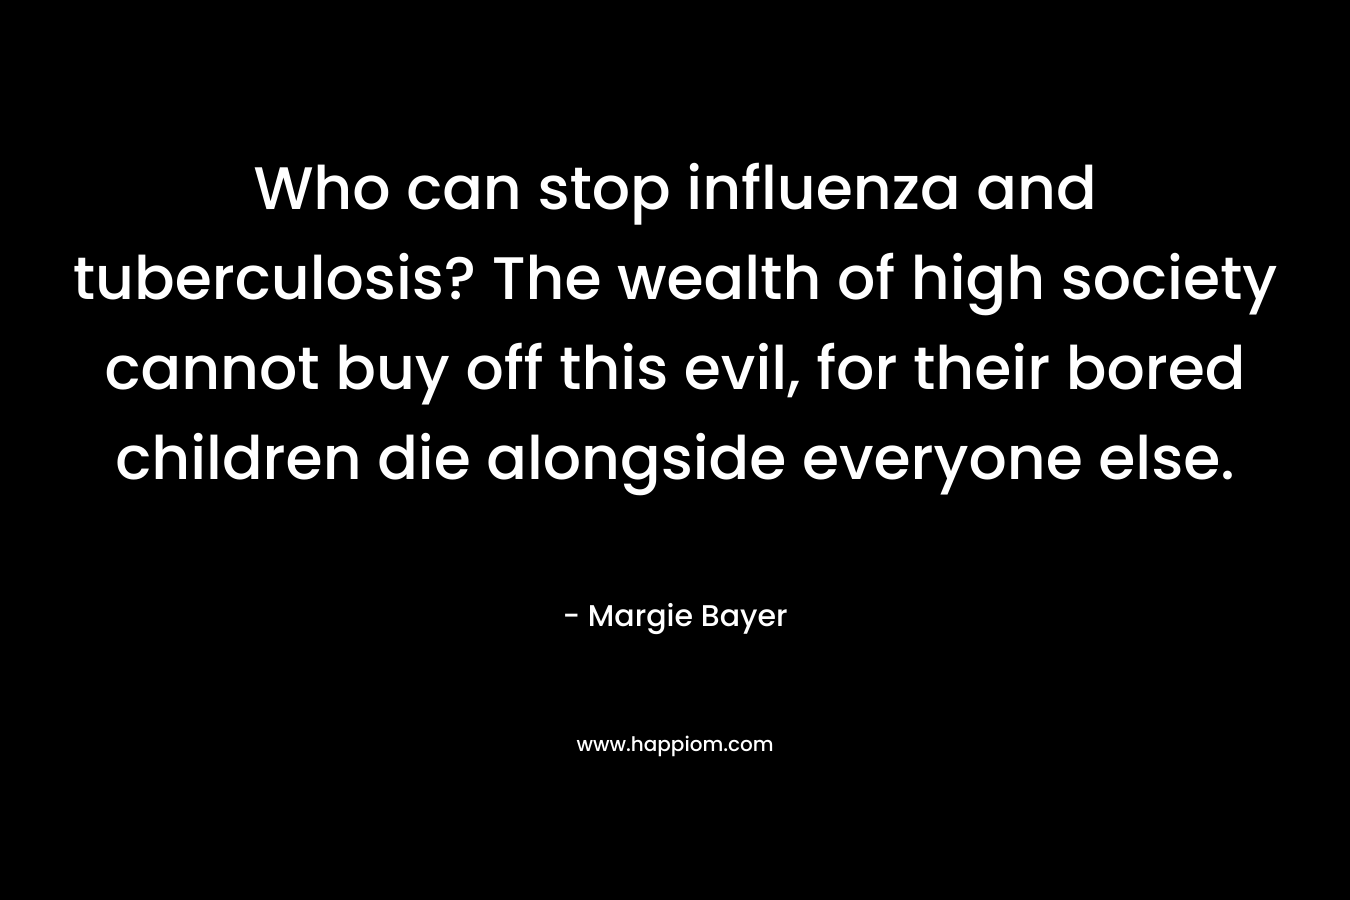 Who can stop influenza and tuberculosis? The wealth of high society cannot buy off this evil, for their bored children die alongside everyone else. – Margie Bayer